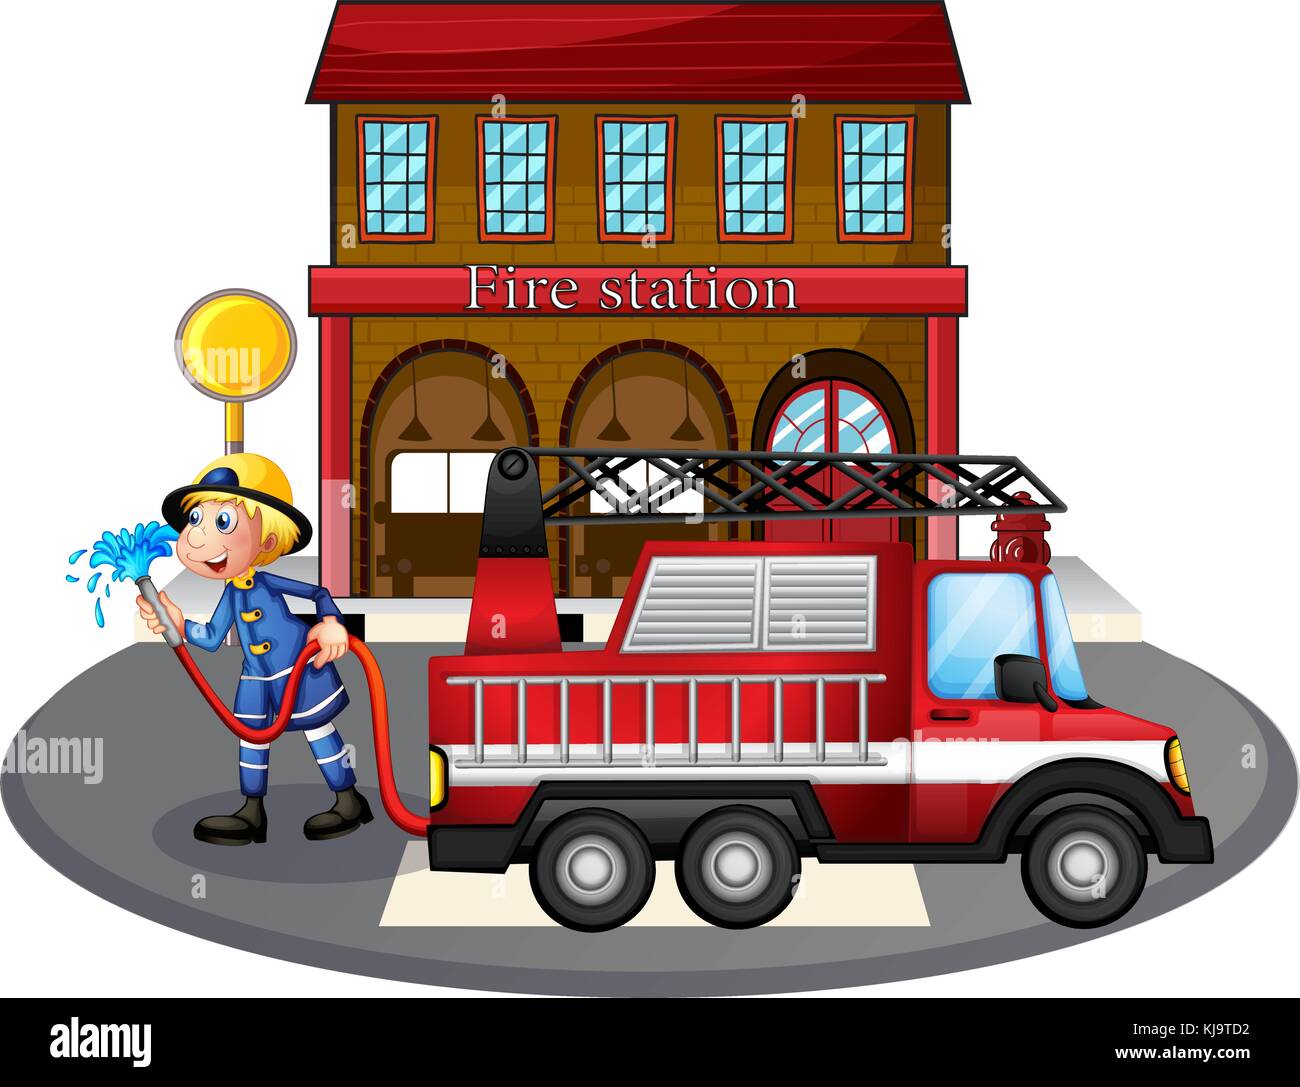 Illustration of a fireman holding a water hose beside a fire truck on a white background Stock Vector